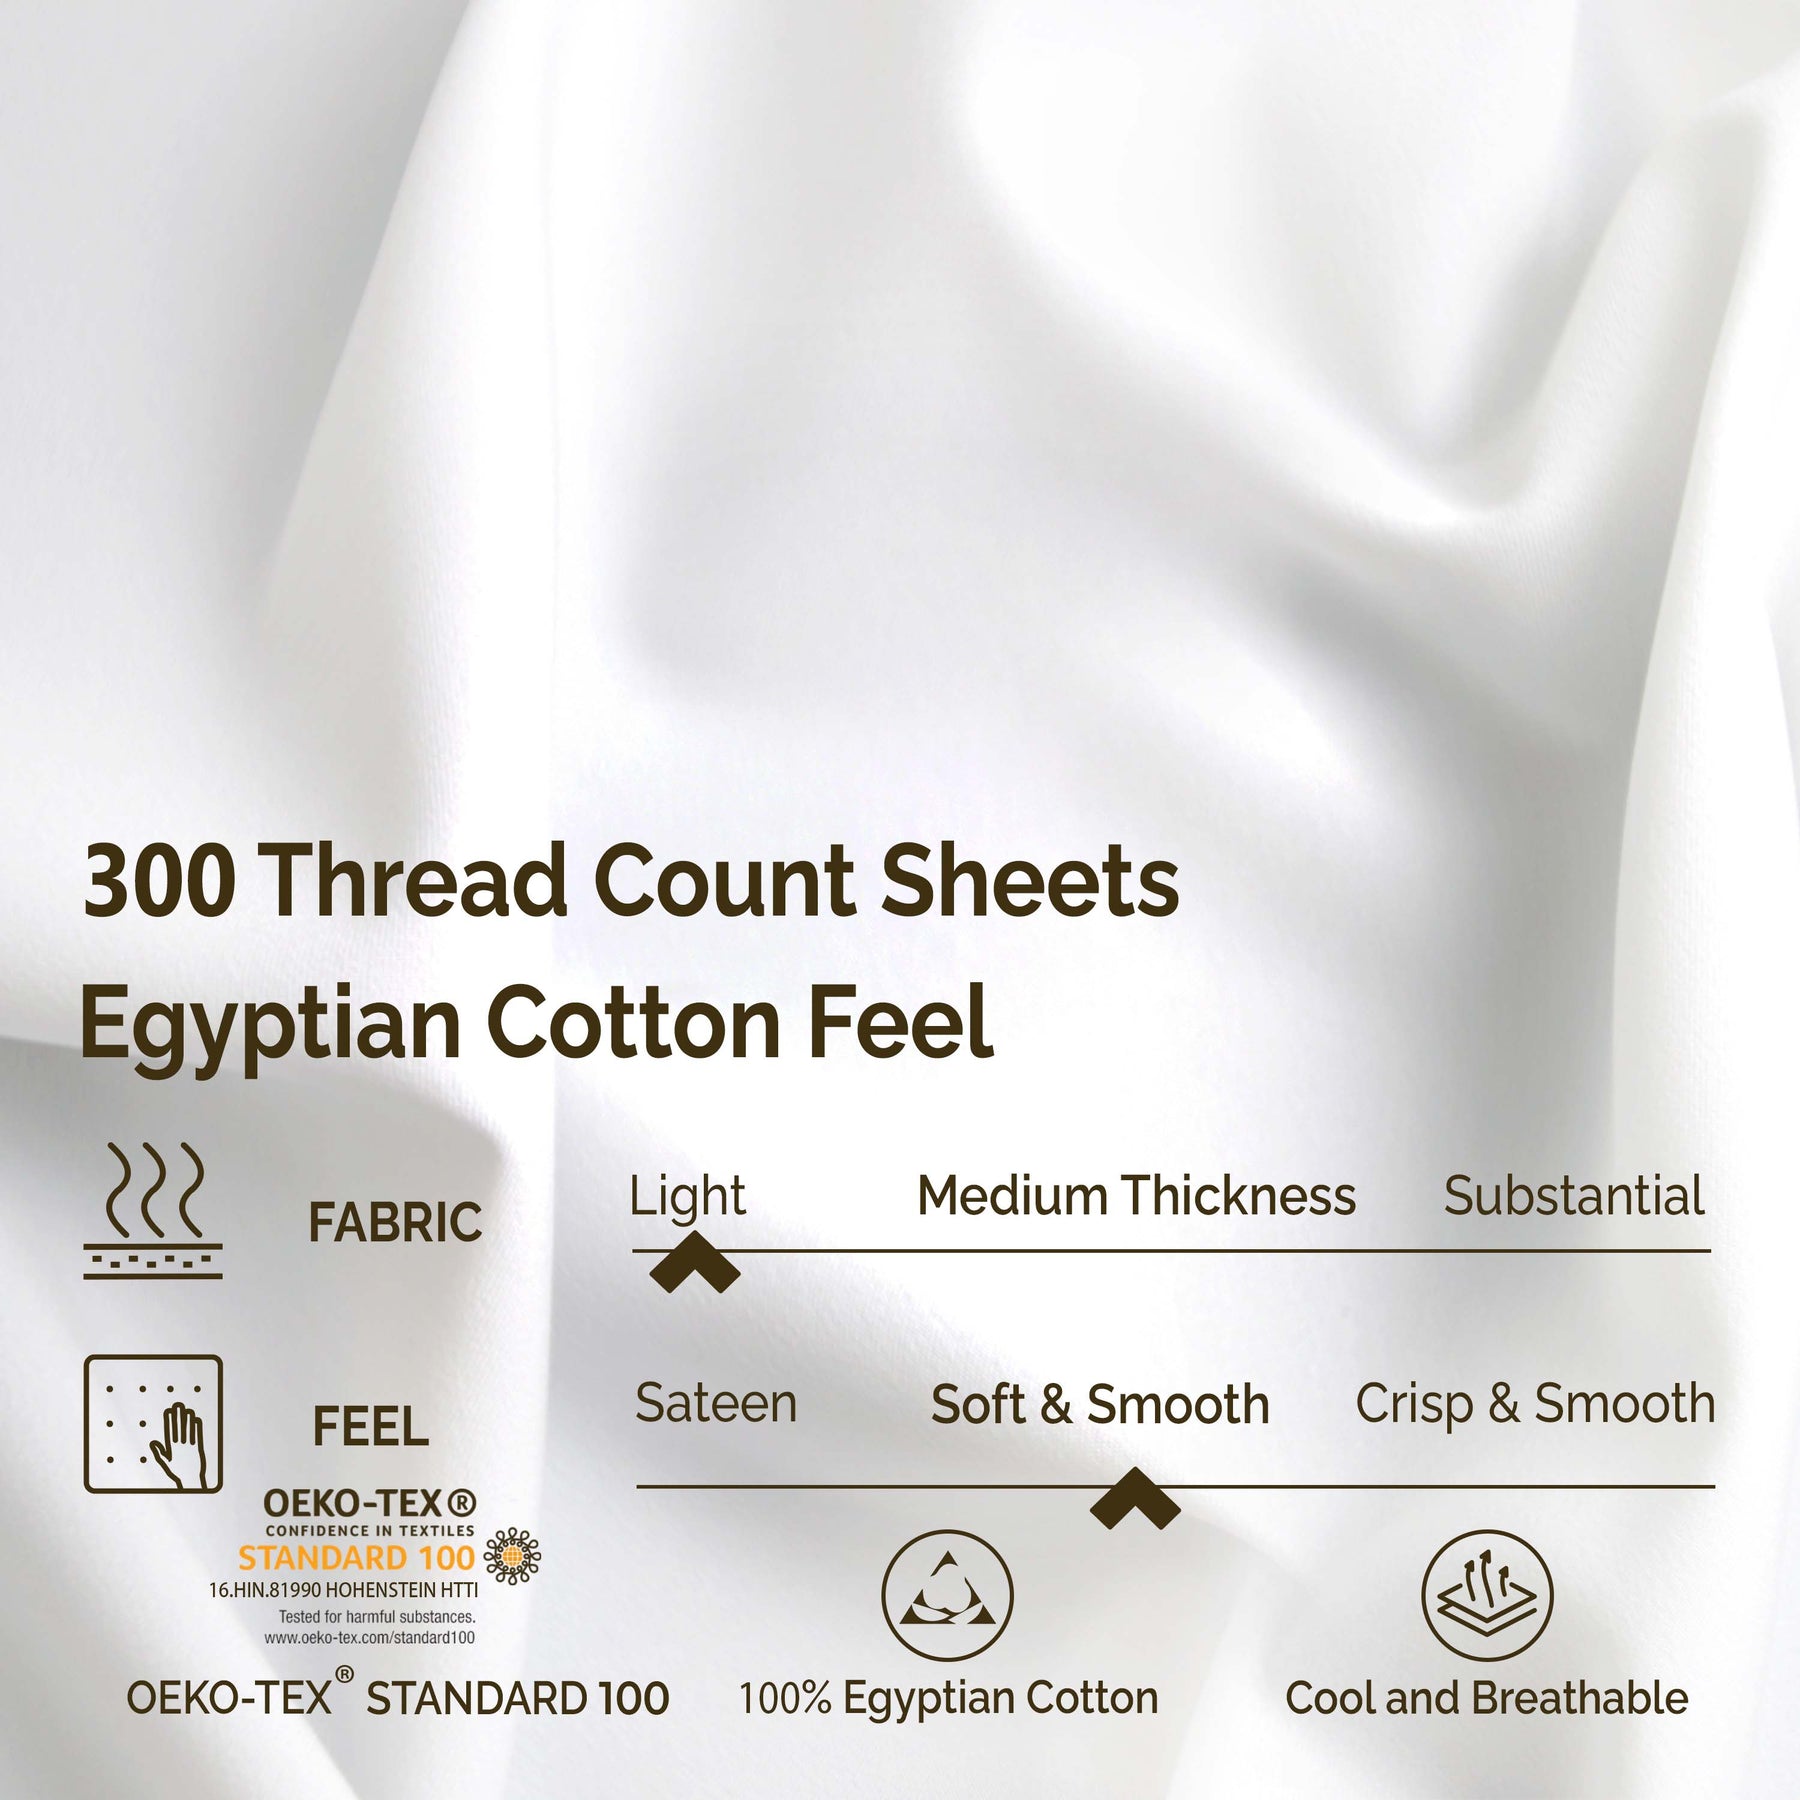 300 Thread Count Egyptian Cotton Solid Deep Pocket Sheet Set - White